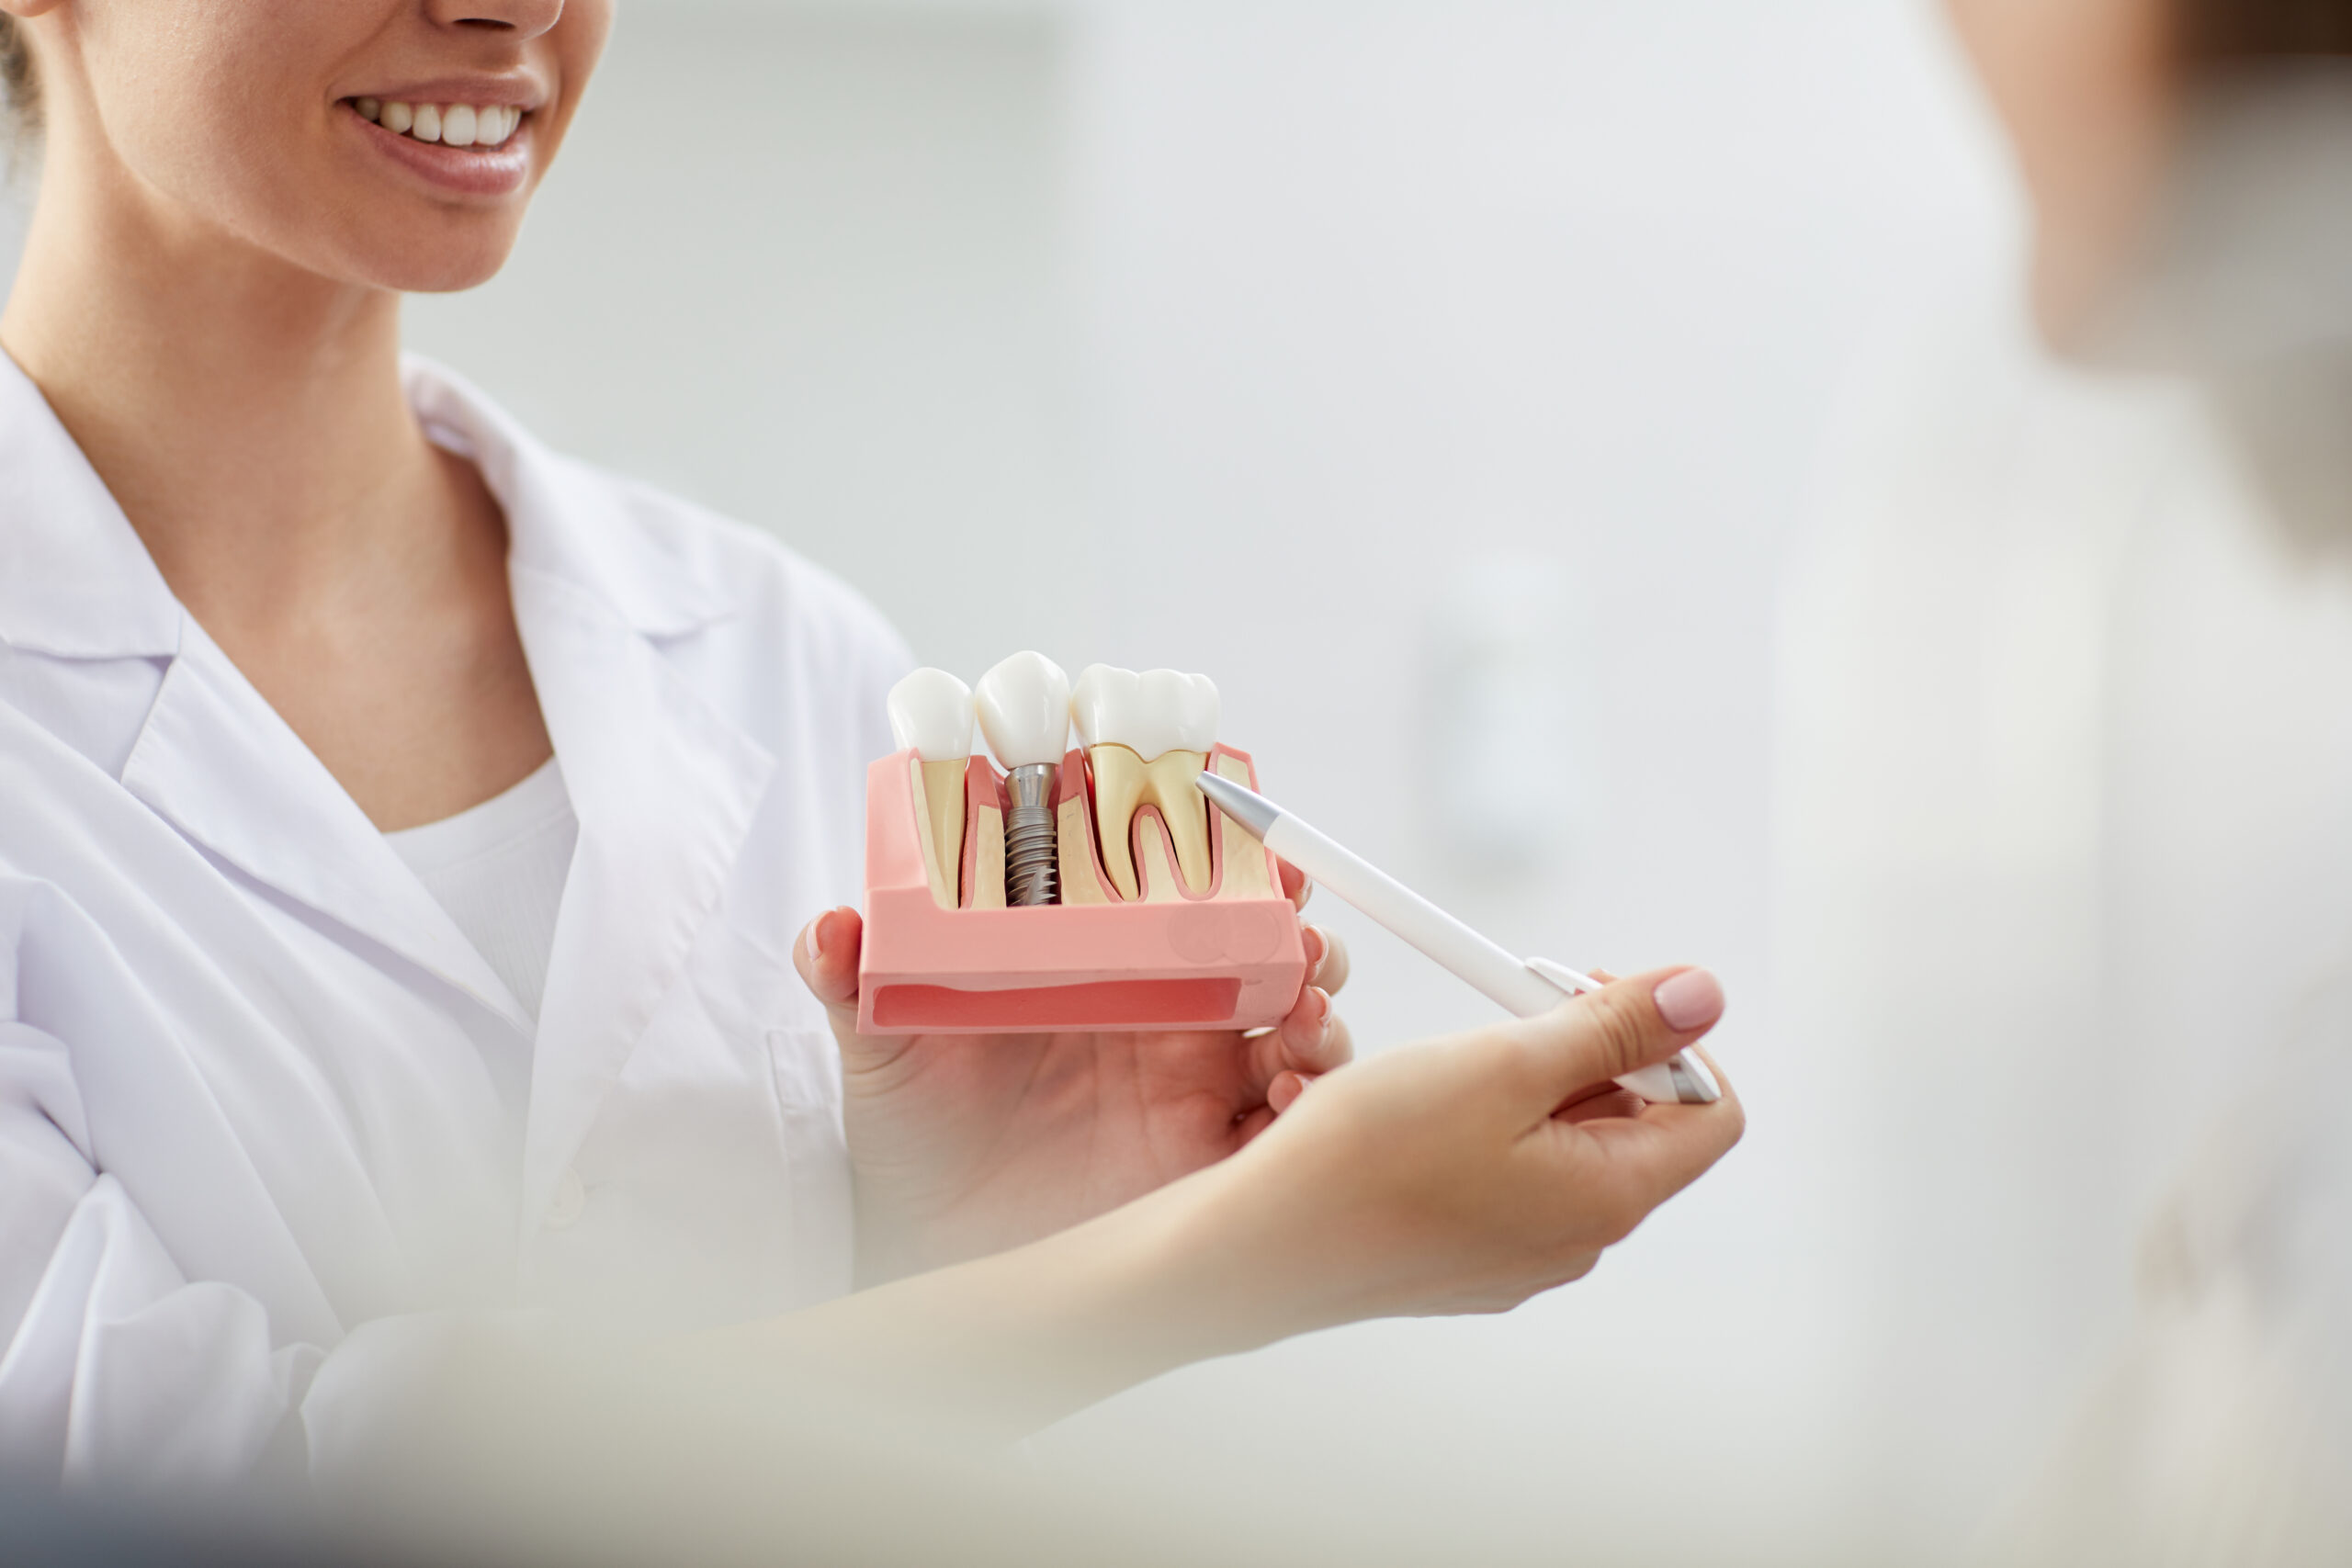 are dental implants safe for people with autoimmune disorders